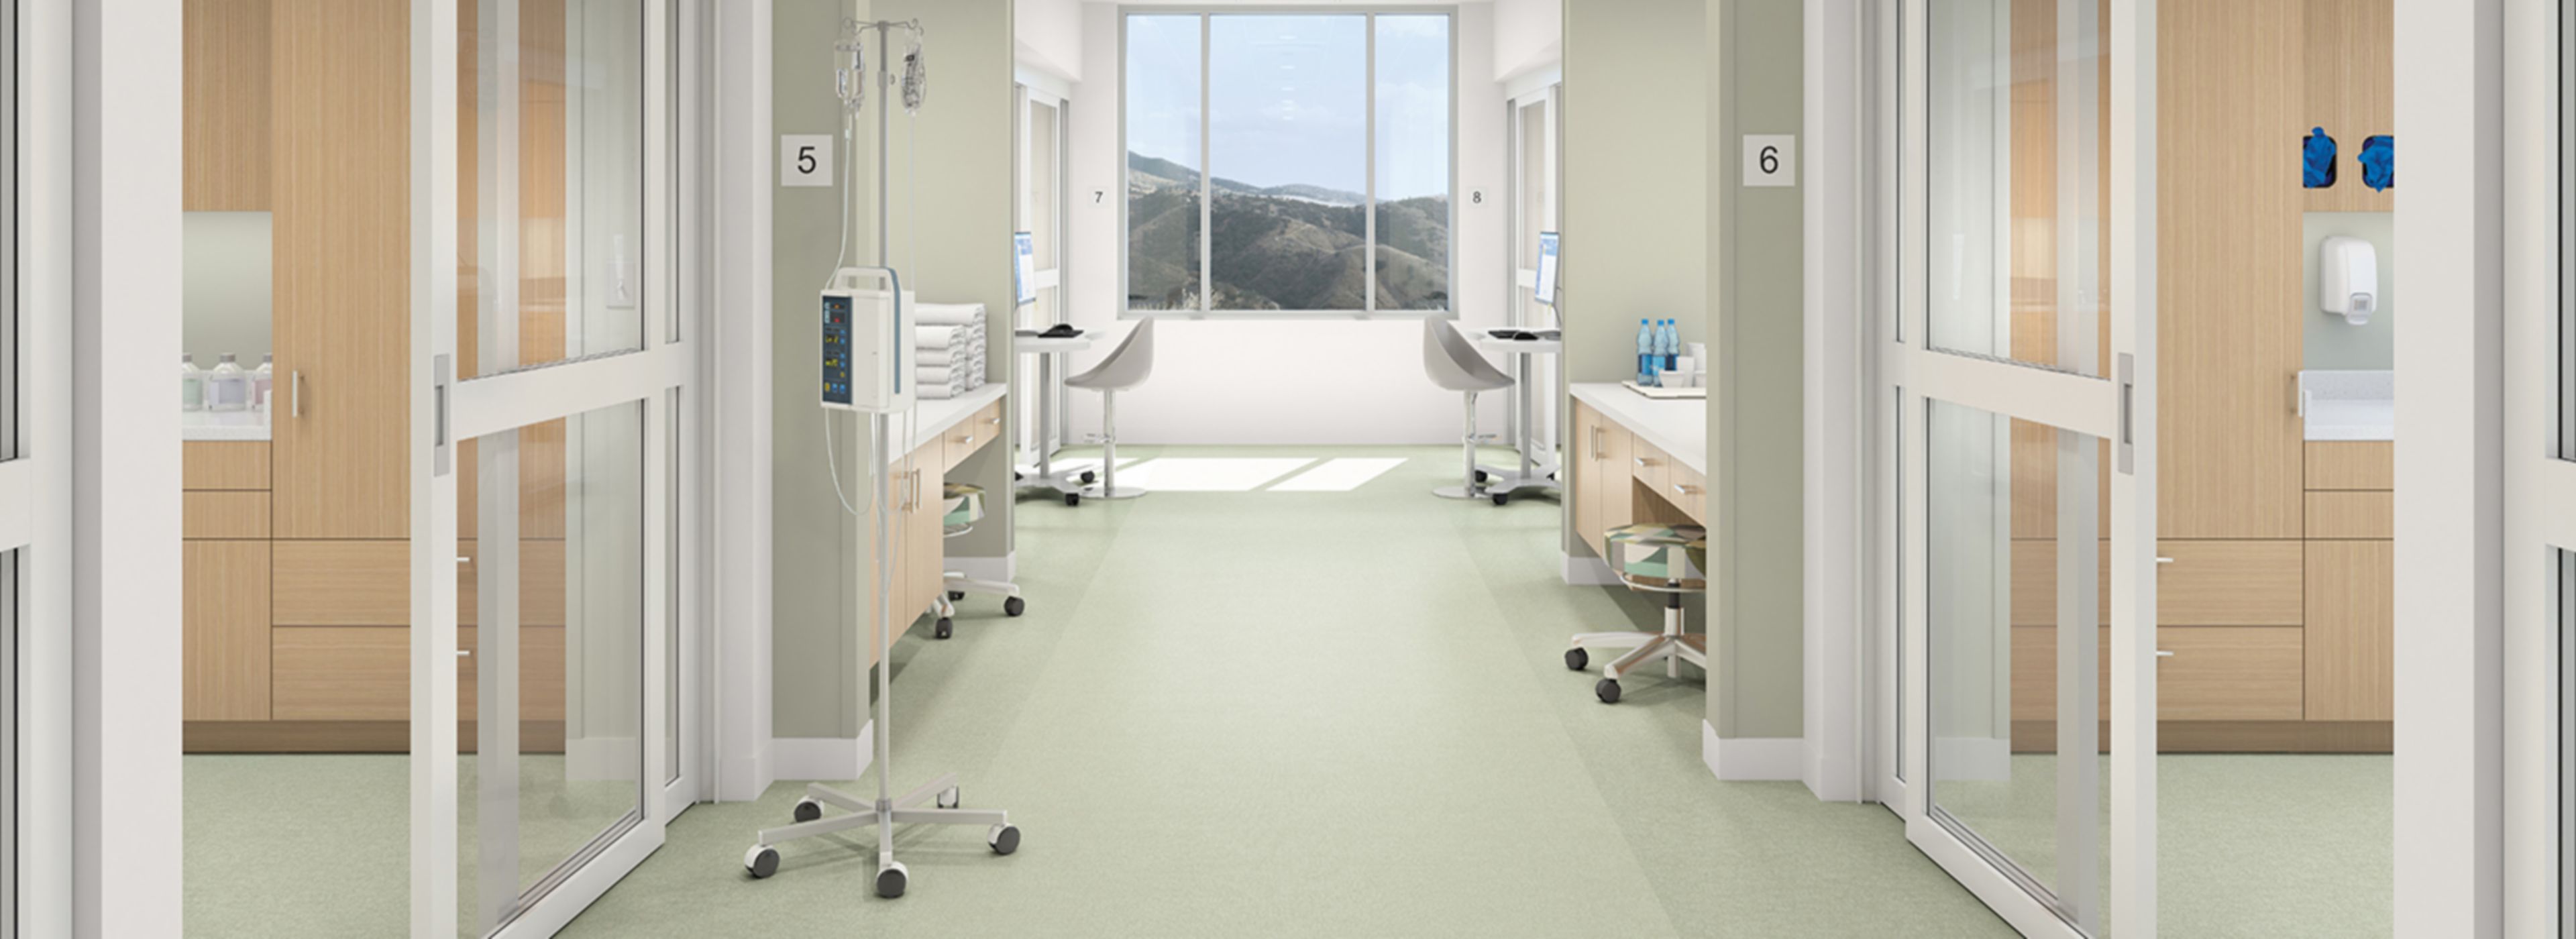 Interface Spike-tacular and Bloom with a View vinyl sheet in hospital corridor and patient rooms imagen número 1